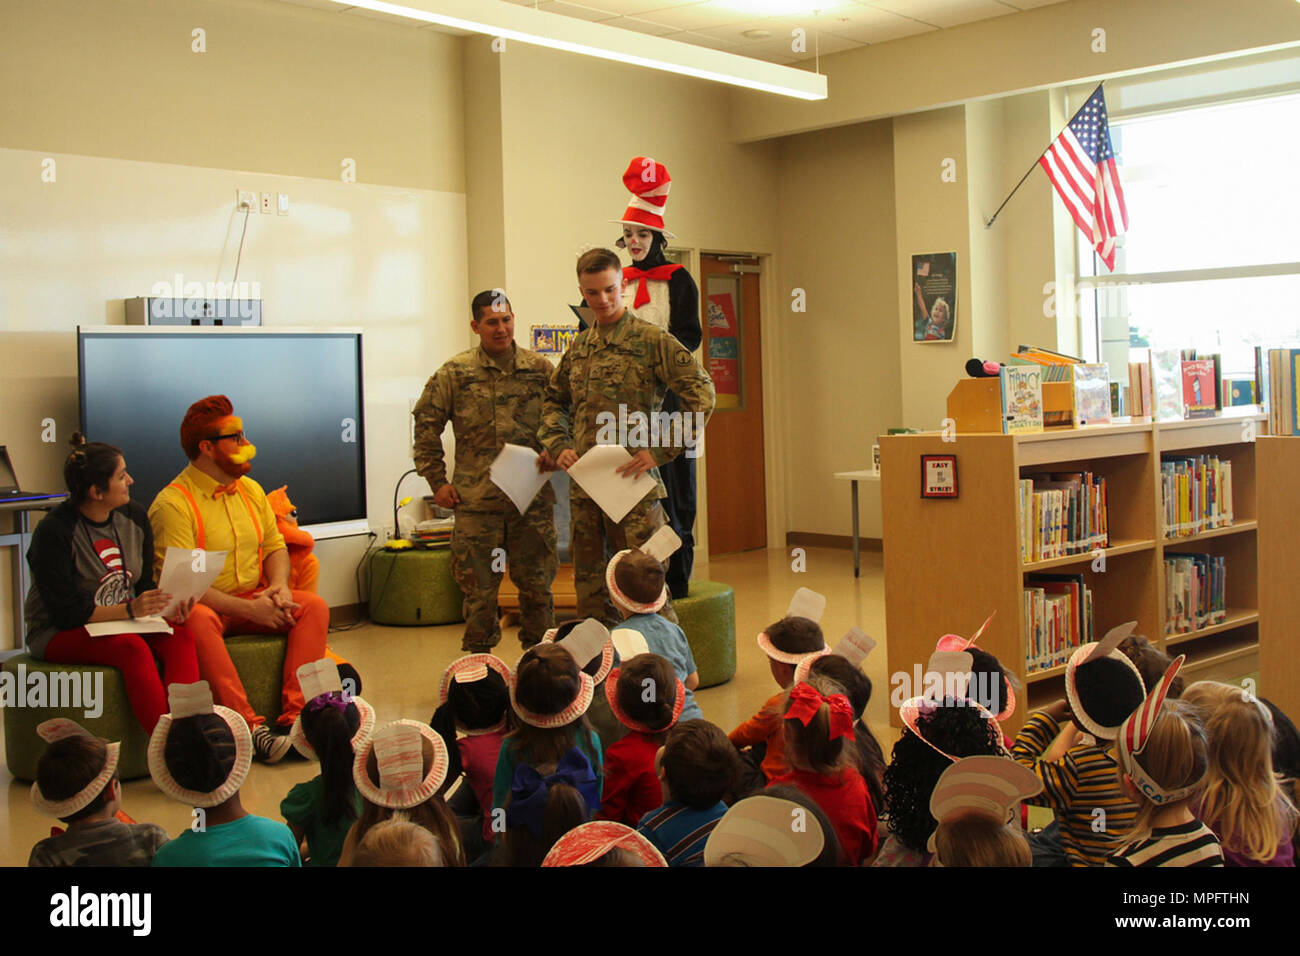 Two Soldiers from the 716th Military Police Battalion, 101st Airborne Division (Air Assault) Sustainment Brigade, 101st Abn. Div., participate in a rehearsal of “The Cat in the Hat” production staff members of Marshall Elementary School put together for the students, March 2, 2017, at Marshall Elementary School on Fort Campbell, Kentucky. The school celebrated the 20th Anniversary of Read Across America by inviting soldiers from 716th MP Bn. To the school and putting the production for the students to encourage and promote reading. (U.S. Army photo by Sgt. Neysa Canfield/101st Airborne Divisio Stock Photo